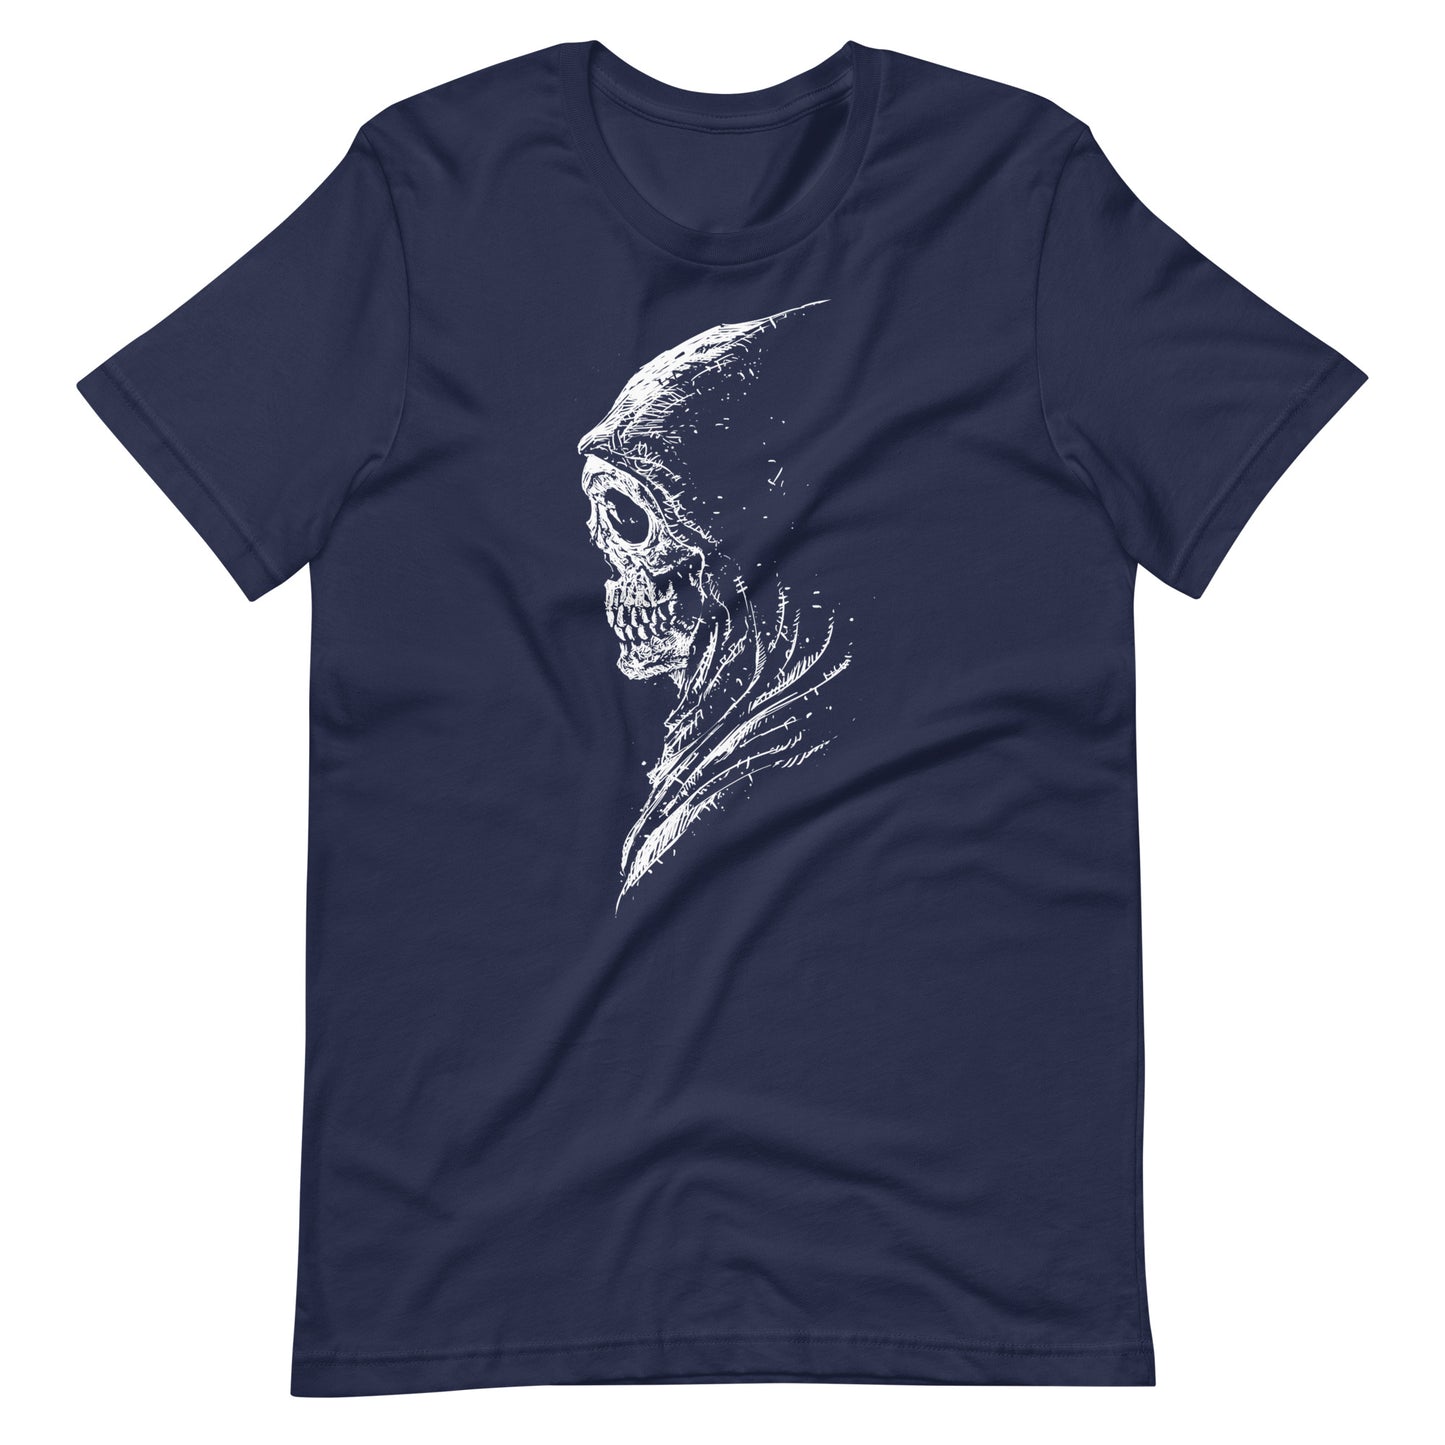 Muse - Men's t-shirt - Navy Front